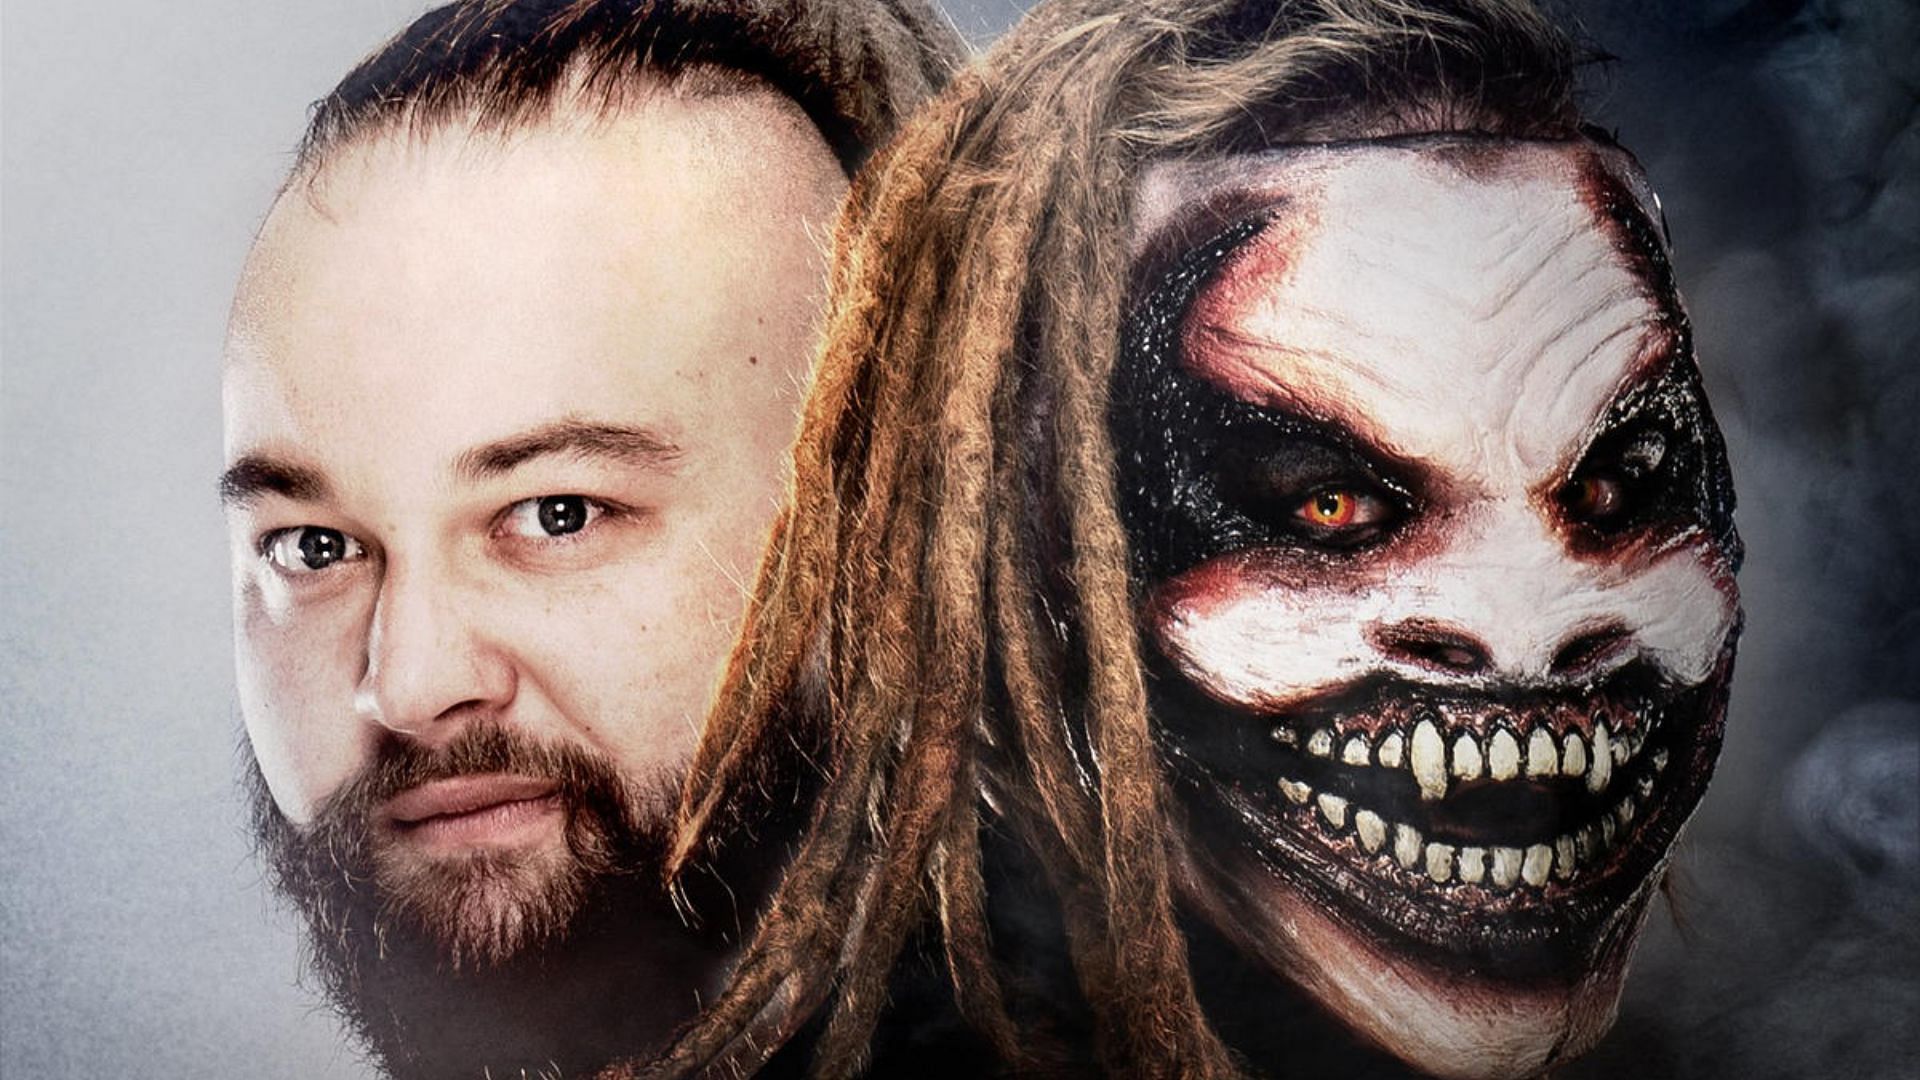 Bray Wyatt (left) and The Fiend (right)